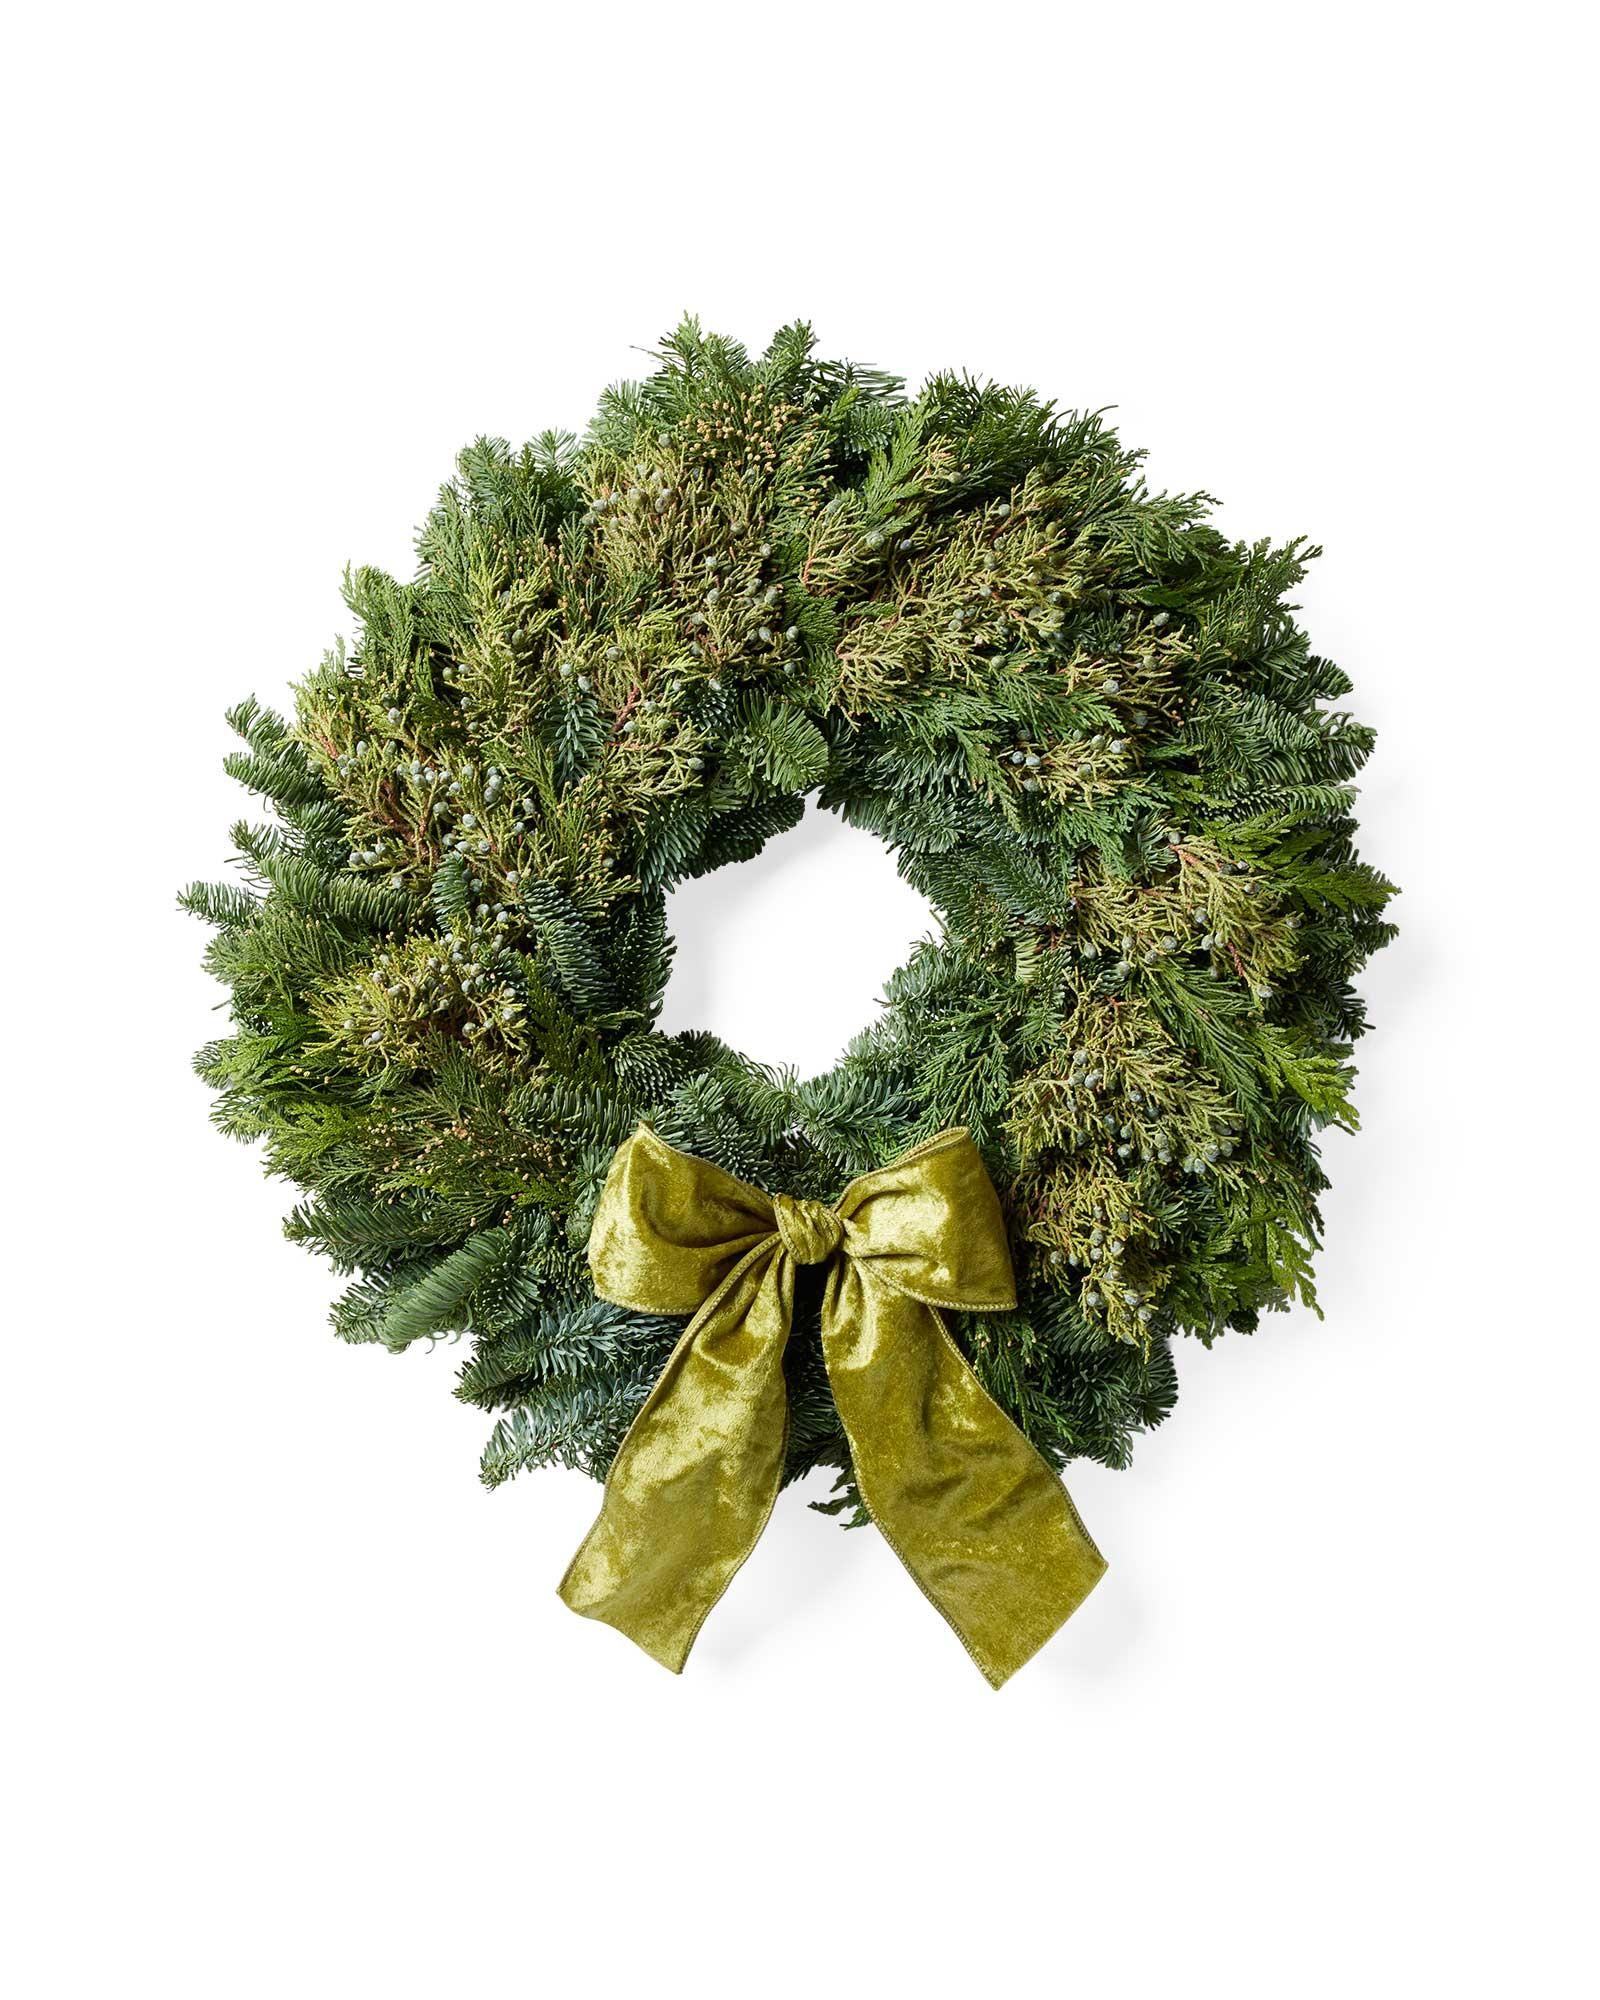 Mixed Evergreen Wreath | Serena and Lily